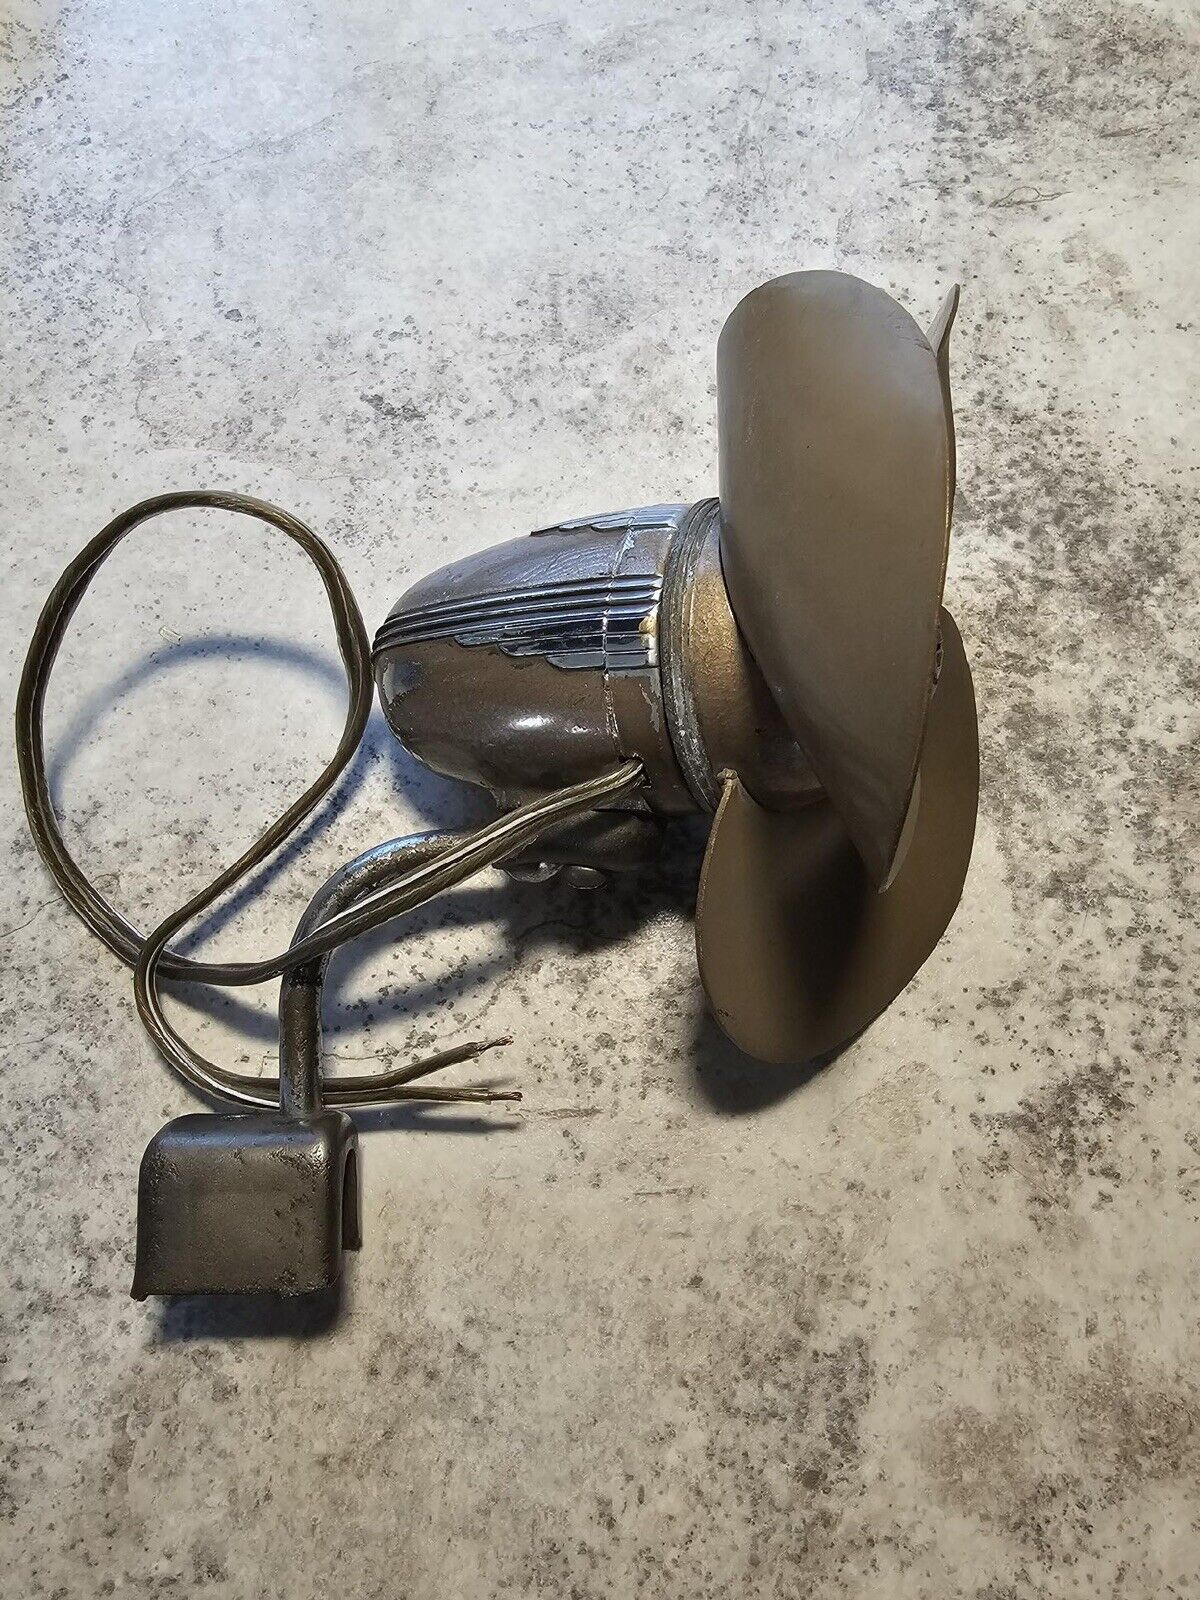 Vintage Antique 1930s 1940s Dash Defrost Fan Ford Chevy GMC TESTED AND WORKS